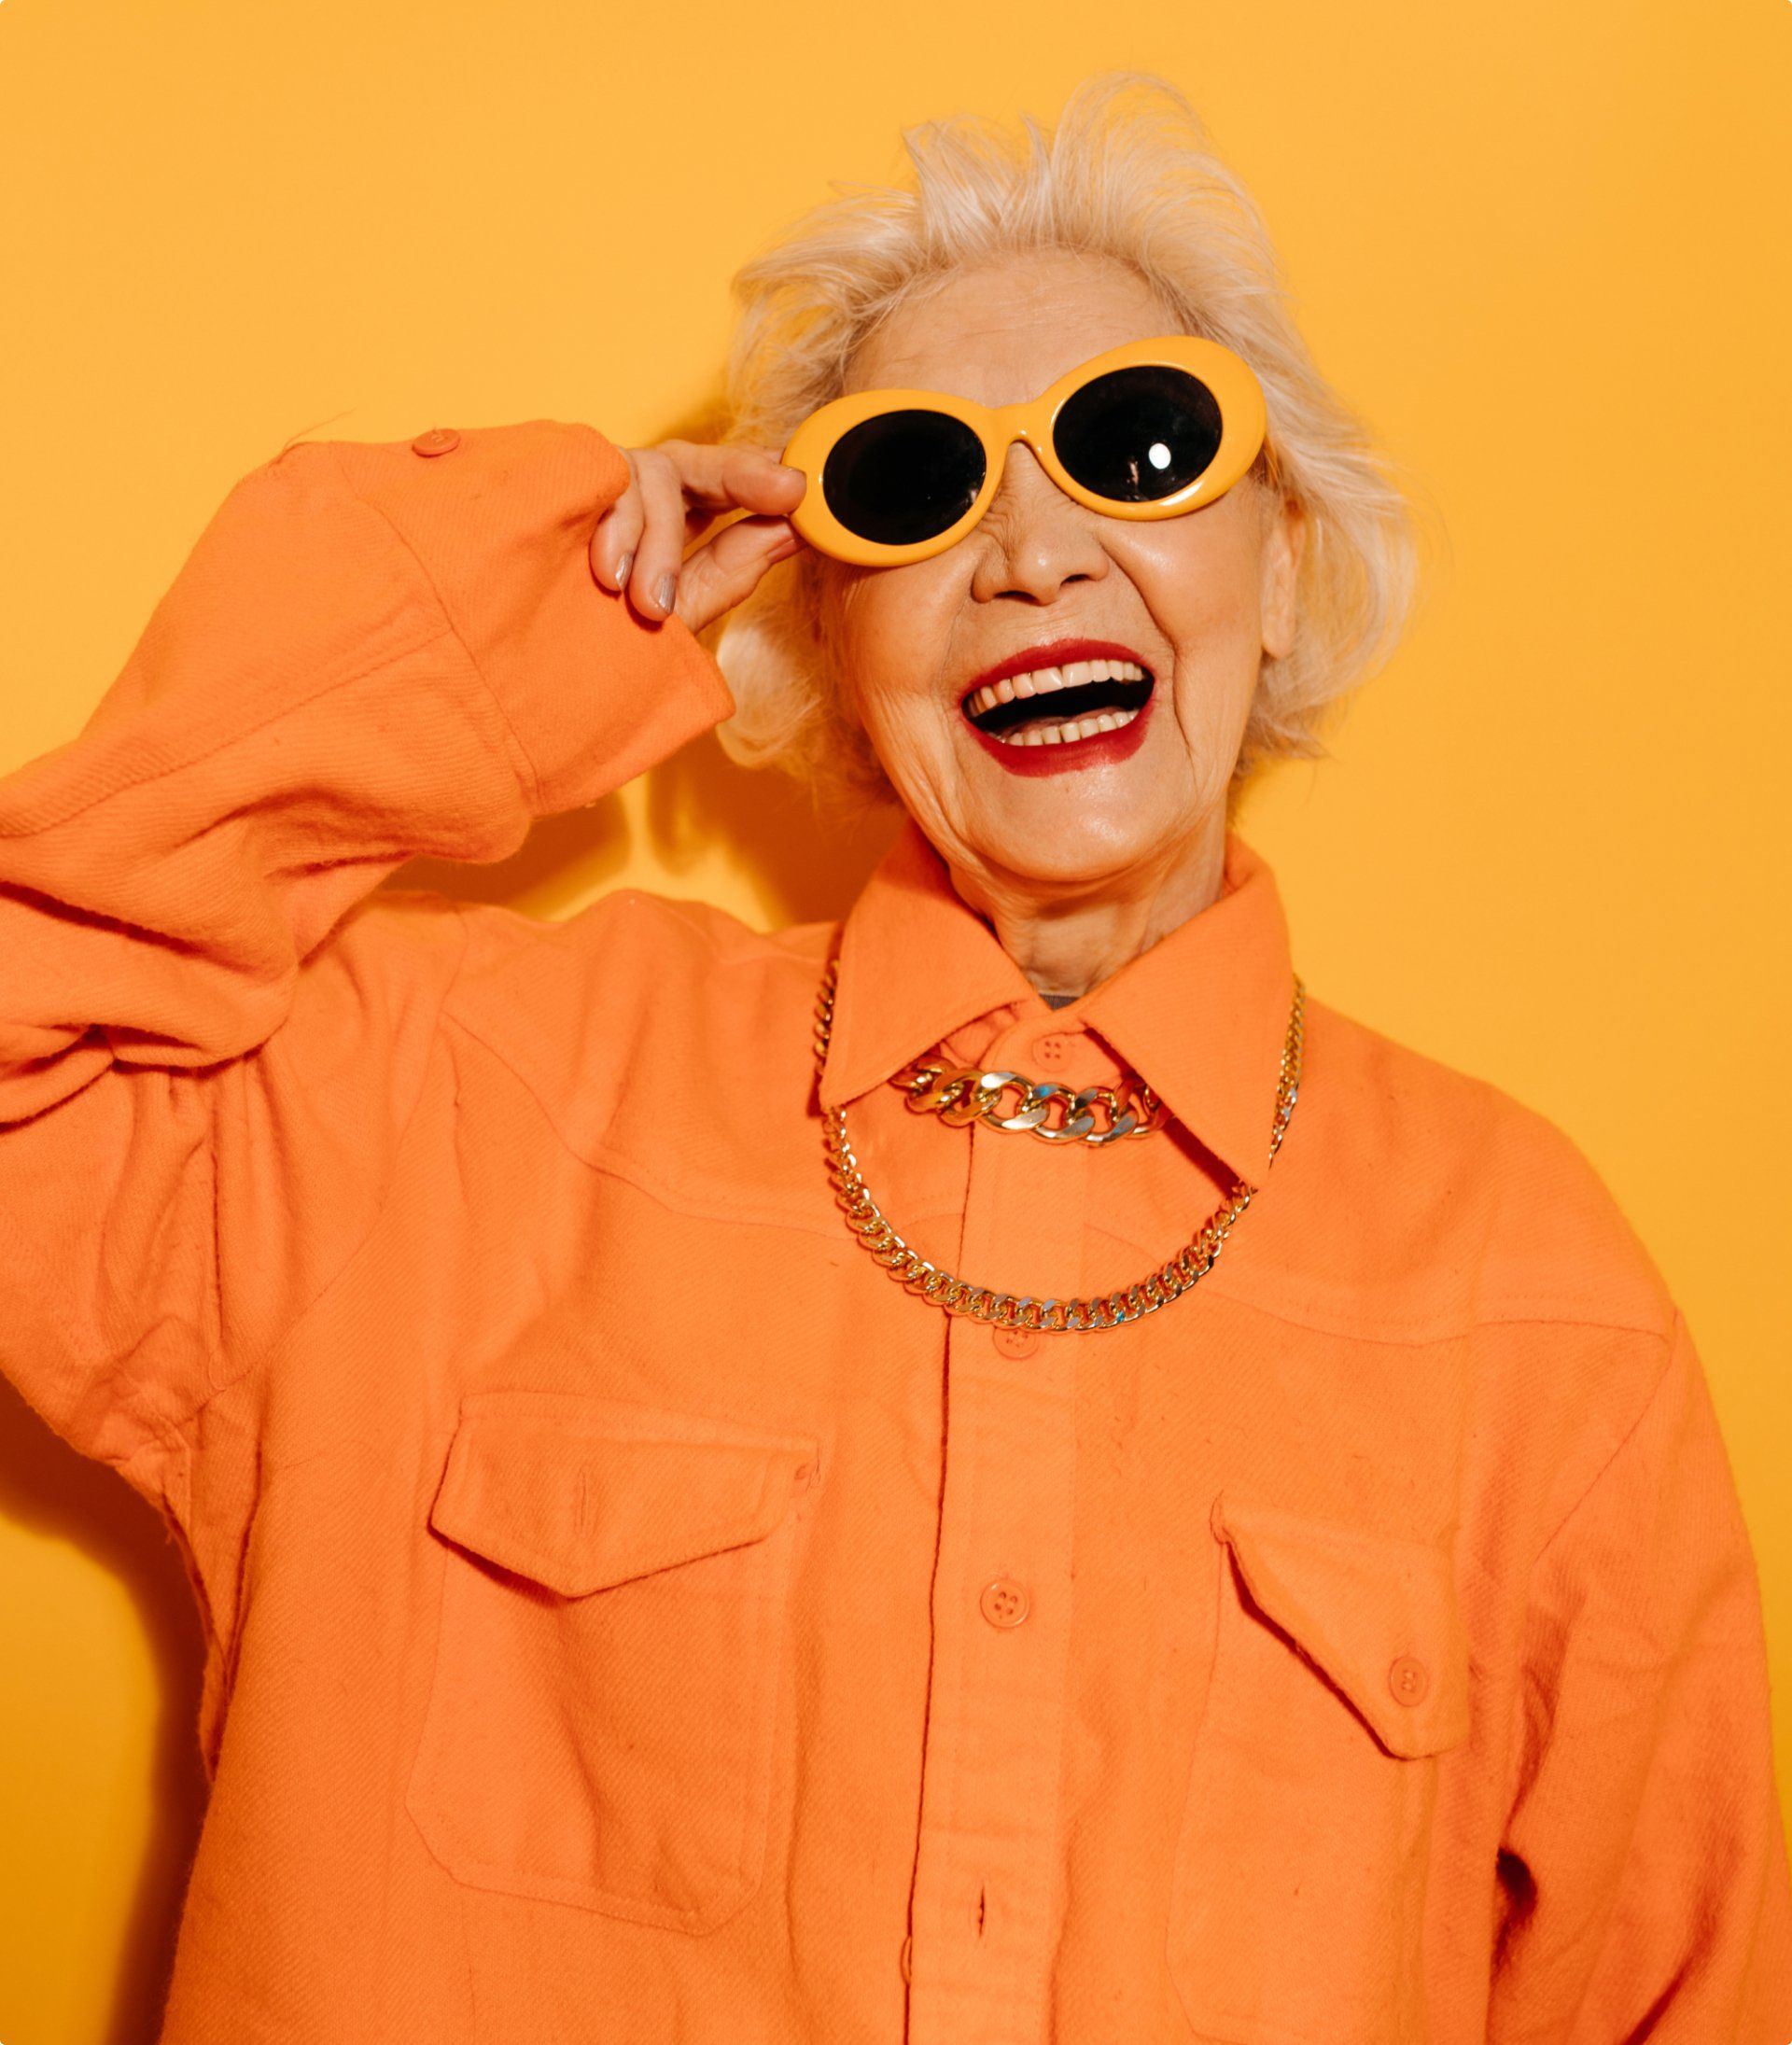 an elderly woman wearing sunglasses and an orange shirt is laughing .